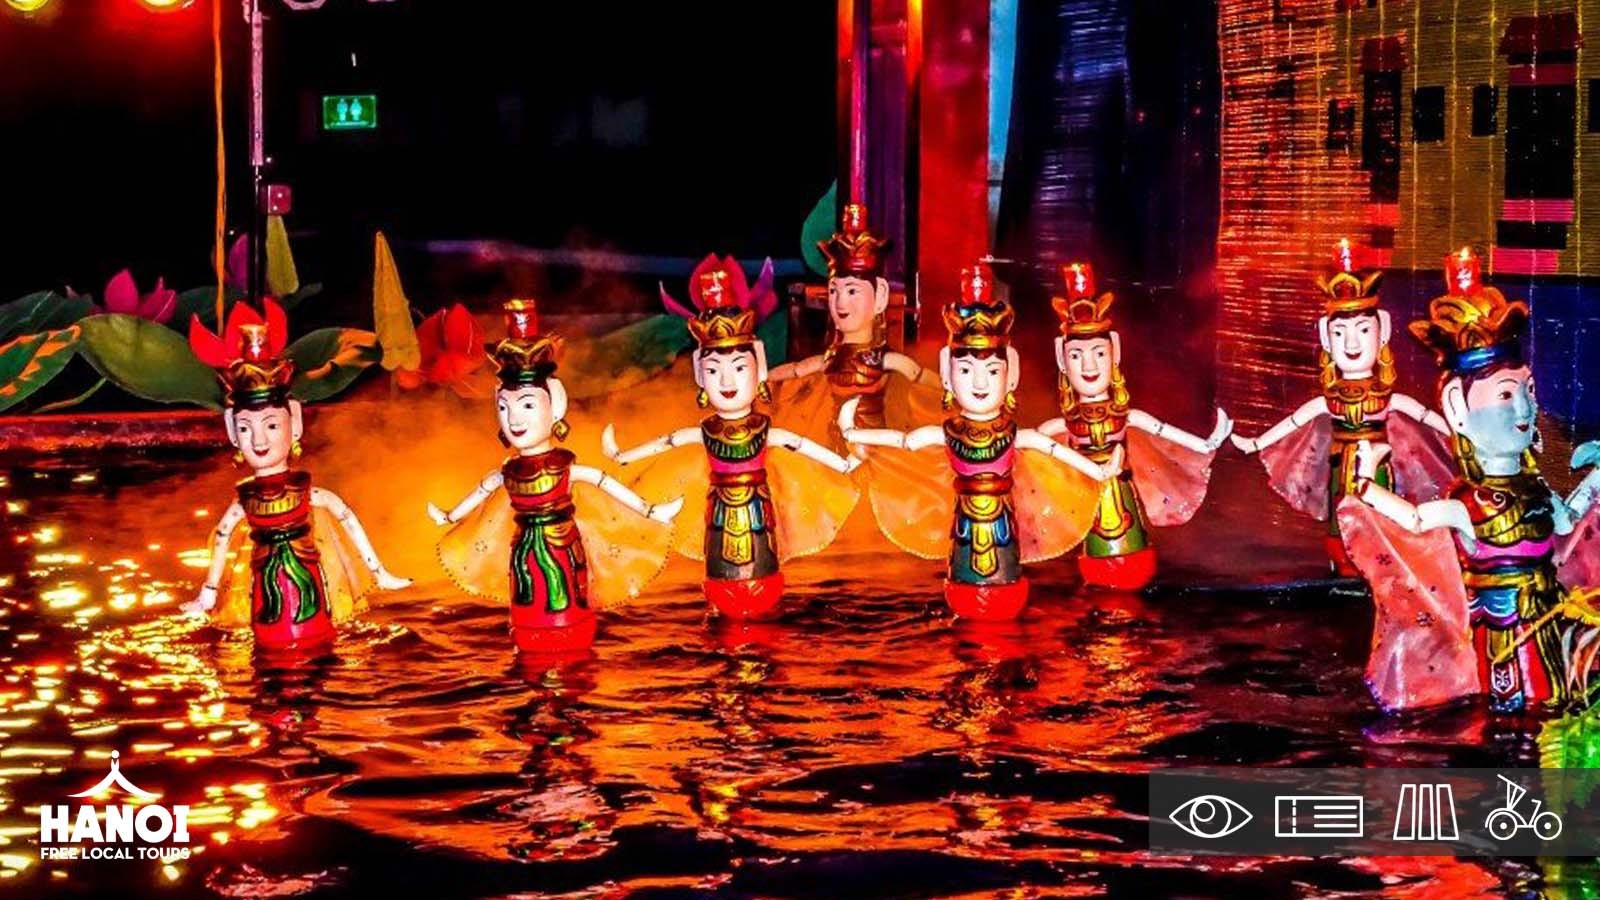 The traditional puppets in a Water Puppet Show in Thang Long theater